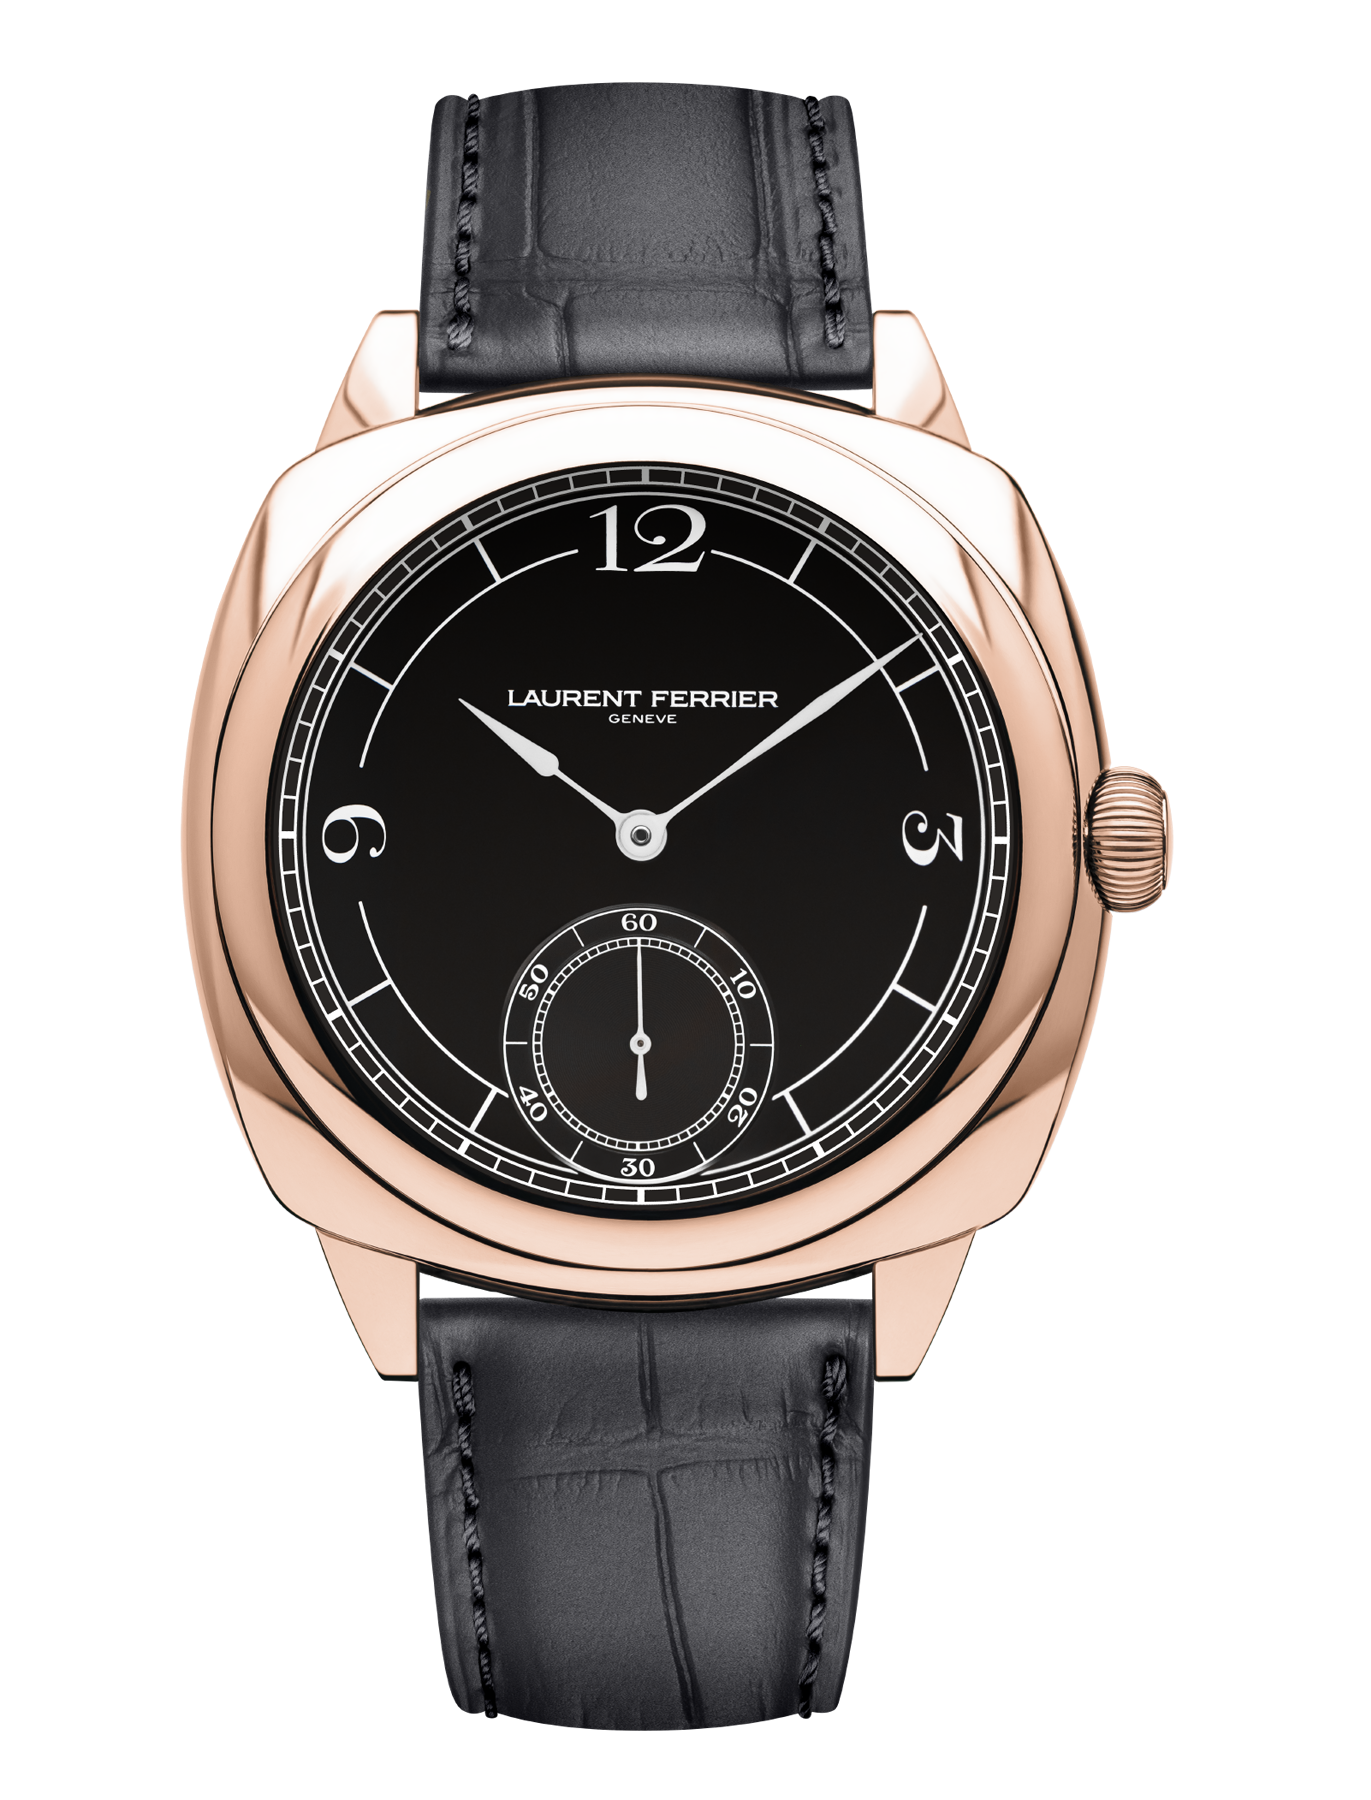 Laurent ferrier square micro rotor retro black red gold case watch lcf013. R5. N2w front soldat hd